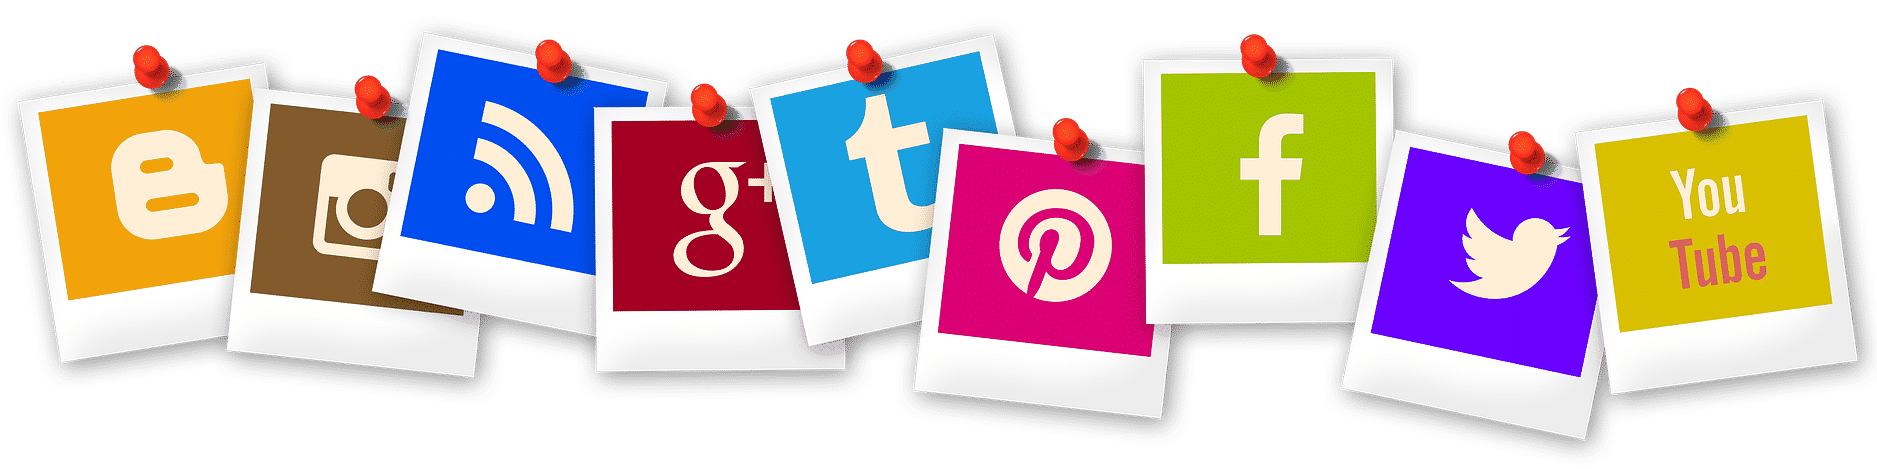 Grow your blog's audience by promoting and sharing on social media.